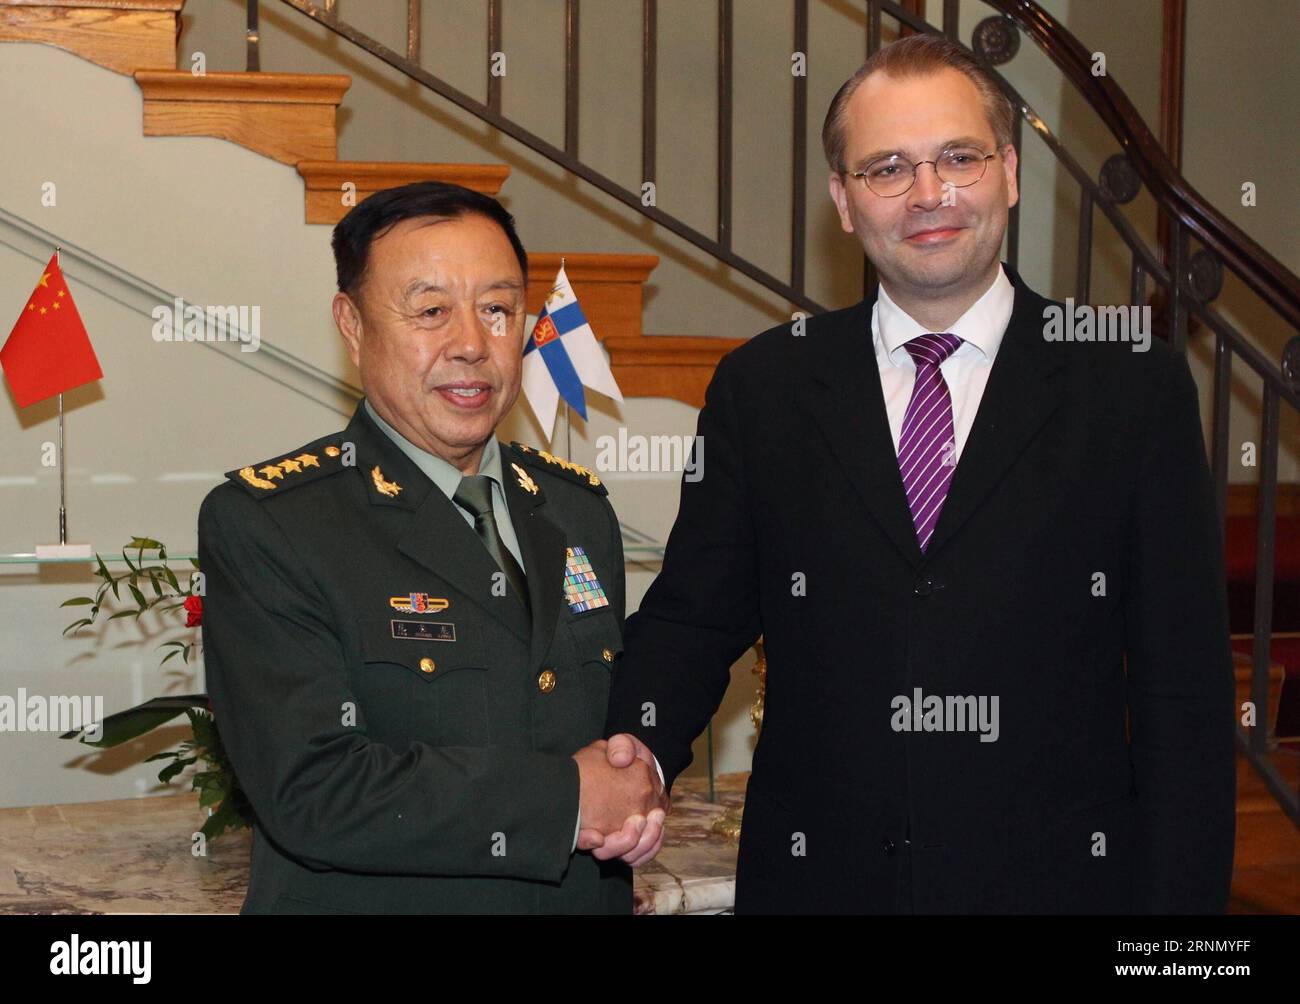 (170616) -- HELSINKI, June 16, 2017 -- Finnish Defense Minister Jussi Niinisto (R) shakes hands with Fan Changlong, vice chairman of the Central Military Commission (CMC) of China, during their meeting in Helsinki, Finland, on June 15, 2017. ) FINLAND-HELSINKI-CHINA-FAN CHANGLONG-VISIT LixJizhi PUBLICATIONxNOTxINxCHN   170616 Helsinki June 16 2017 Finnish Defense Ministers Jussi Niinisto r Shakes Hands With supporter Chang Long Vice Chairman of The Central Military Commission CMC of China during their Meeting in Helsinki Finland ON June 15 2017 Finland Helsinki China supporter Chang Long Visit Stock Photo